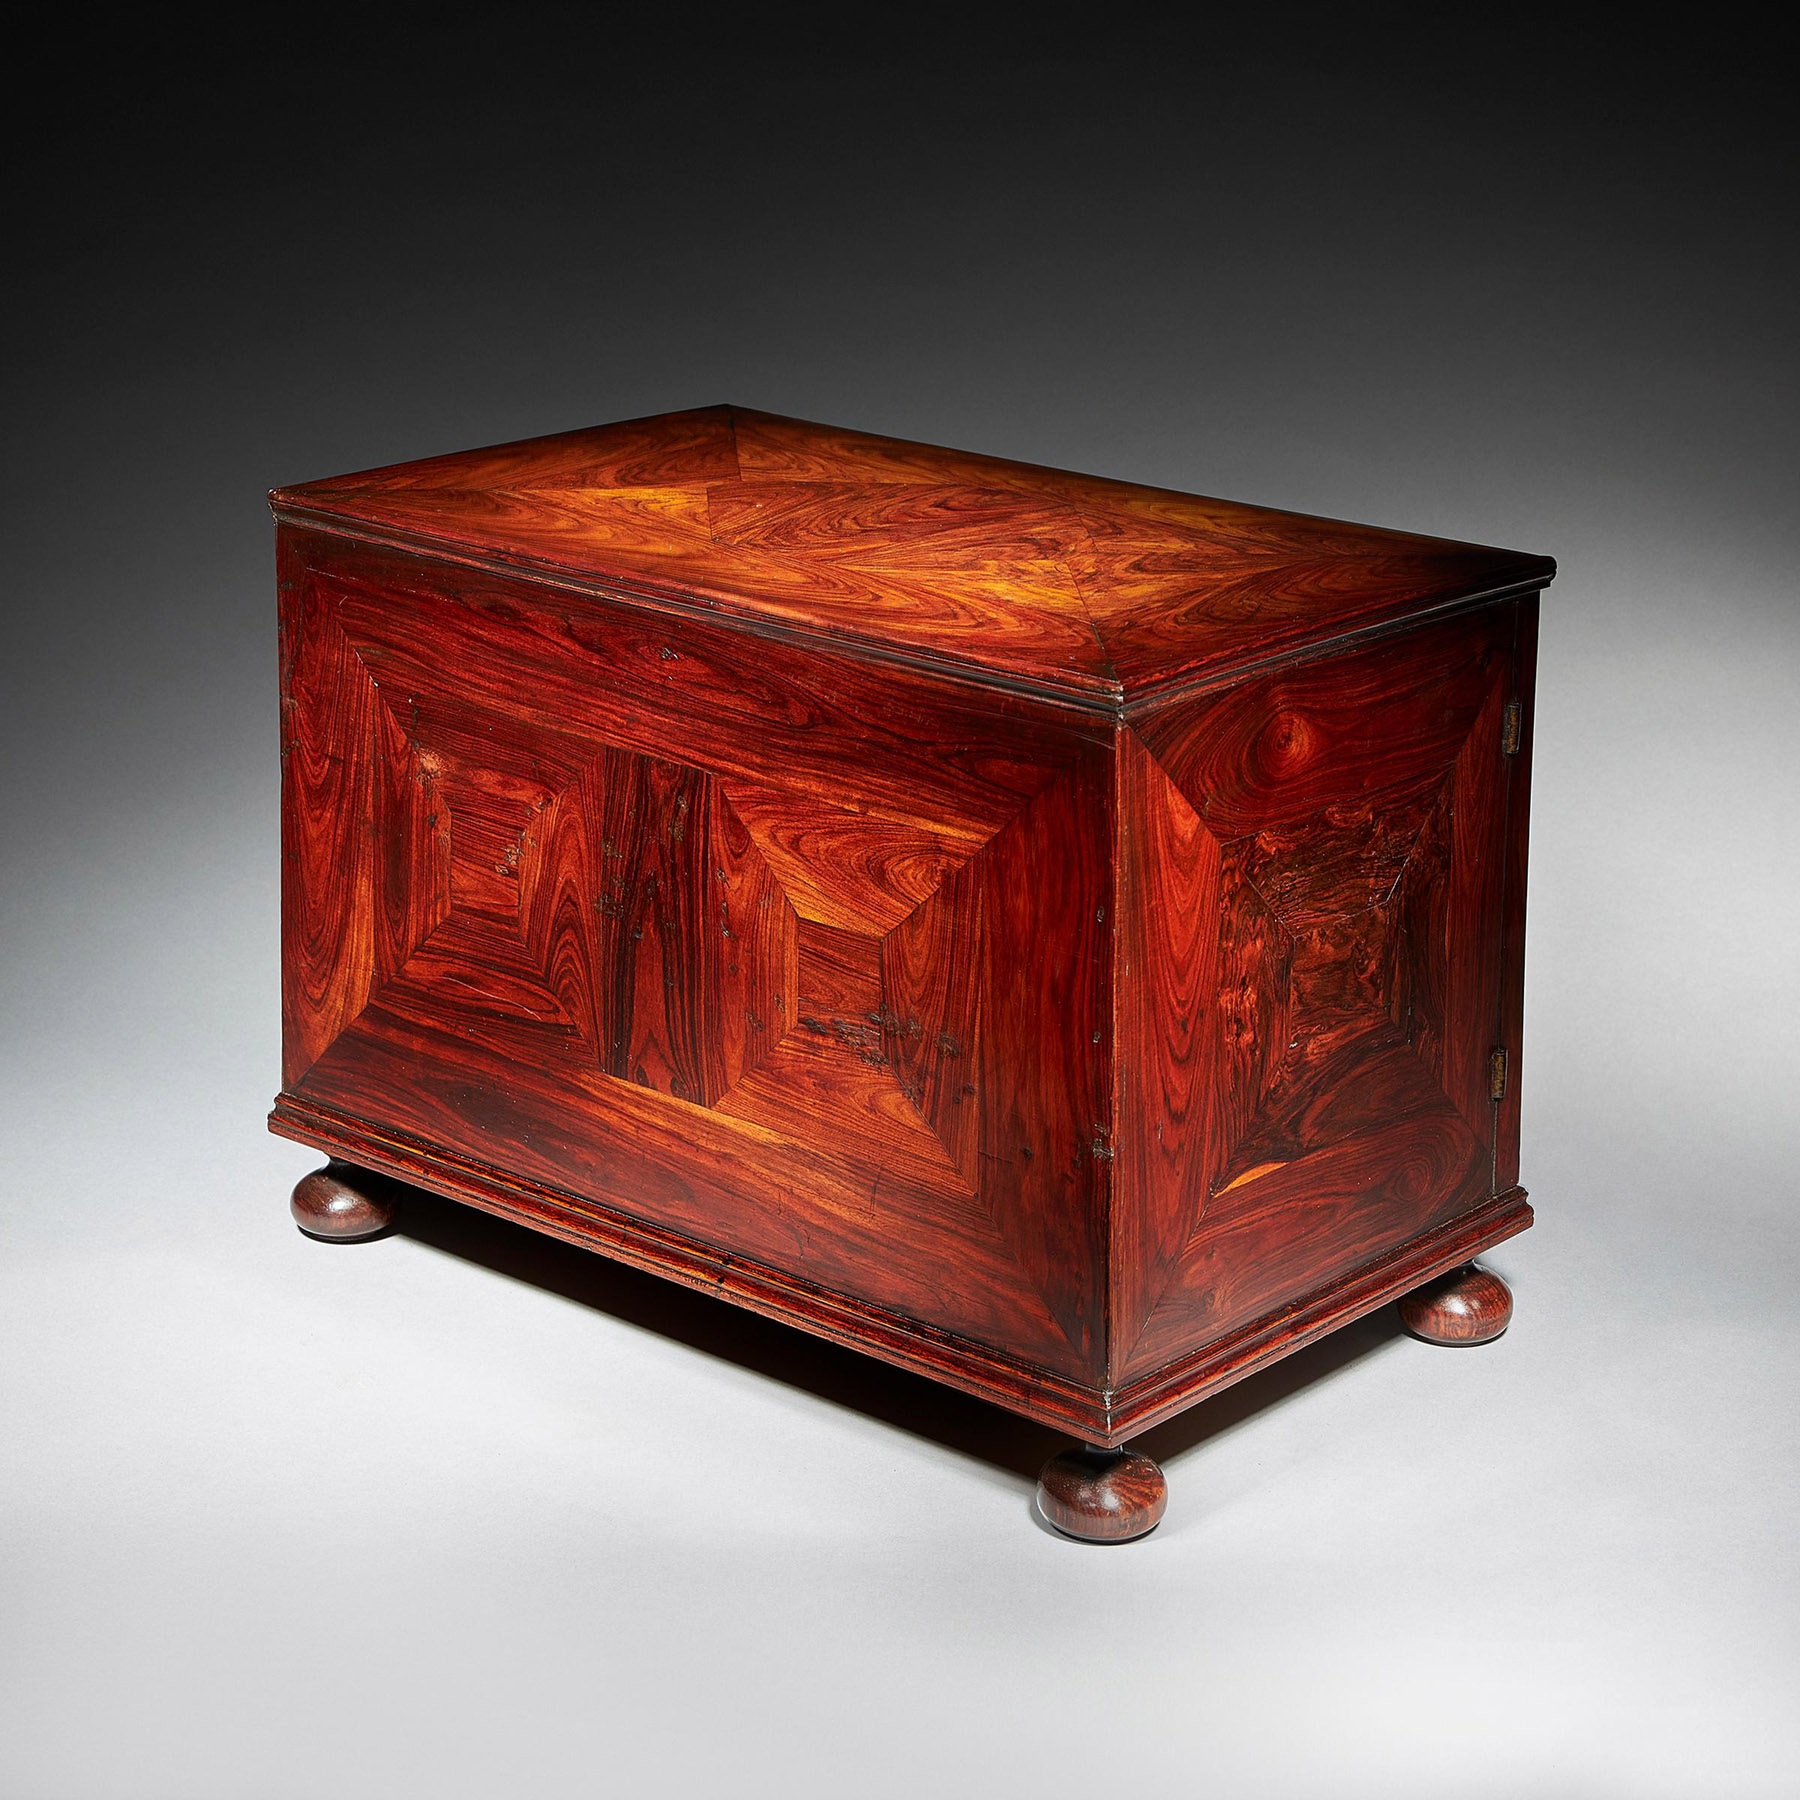 Extremely Rare and Fine Miniature Kingwood Table Cabinet from the Reign of Charles II 5